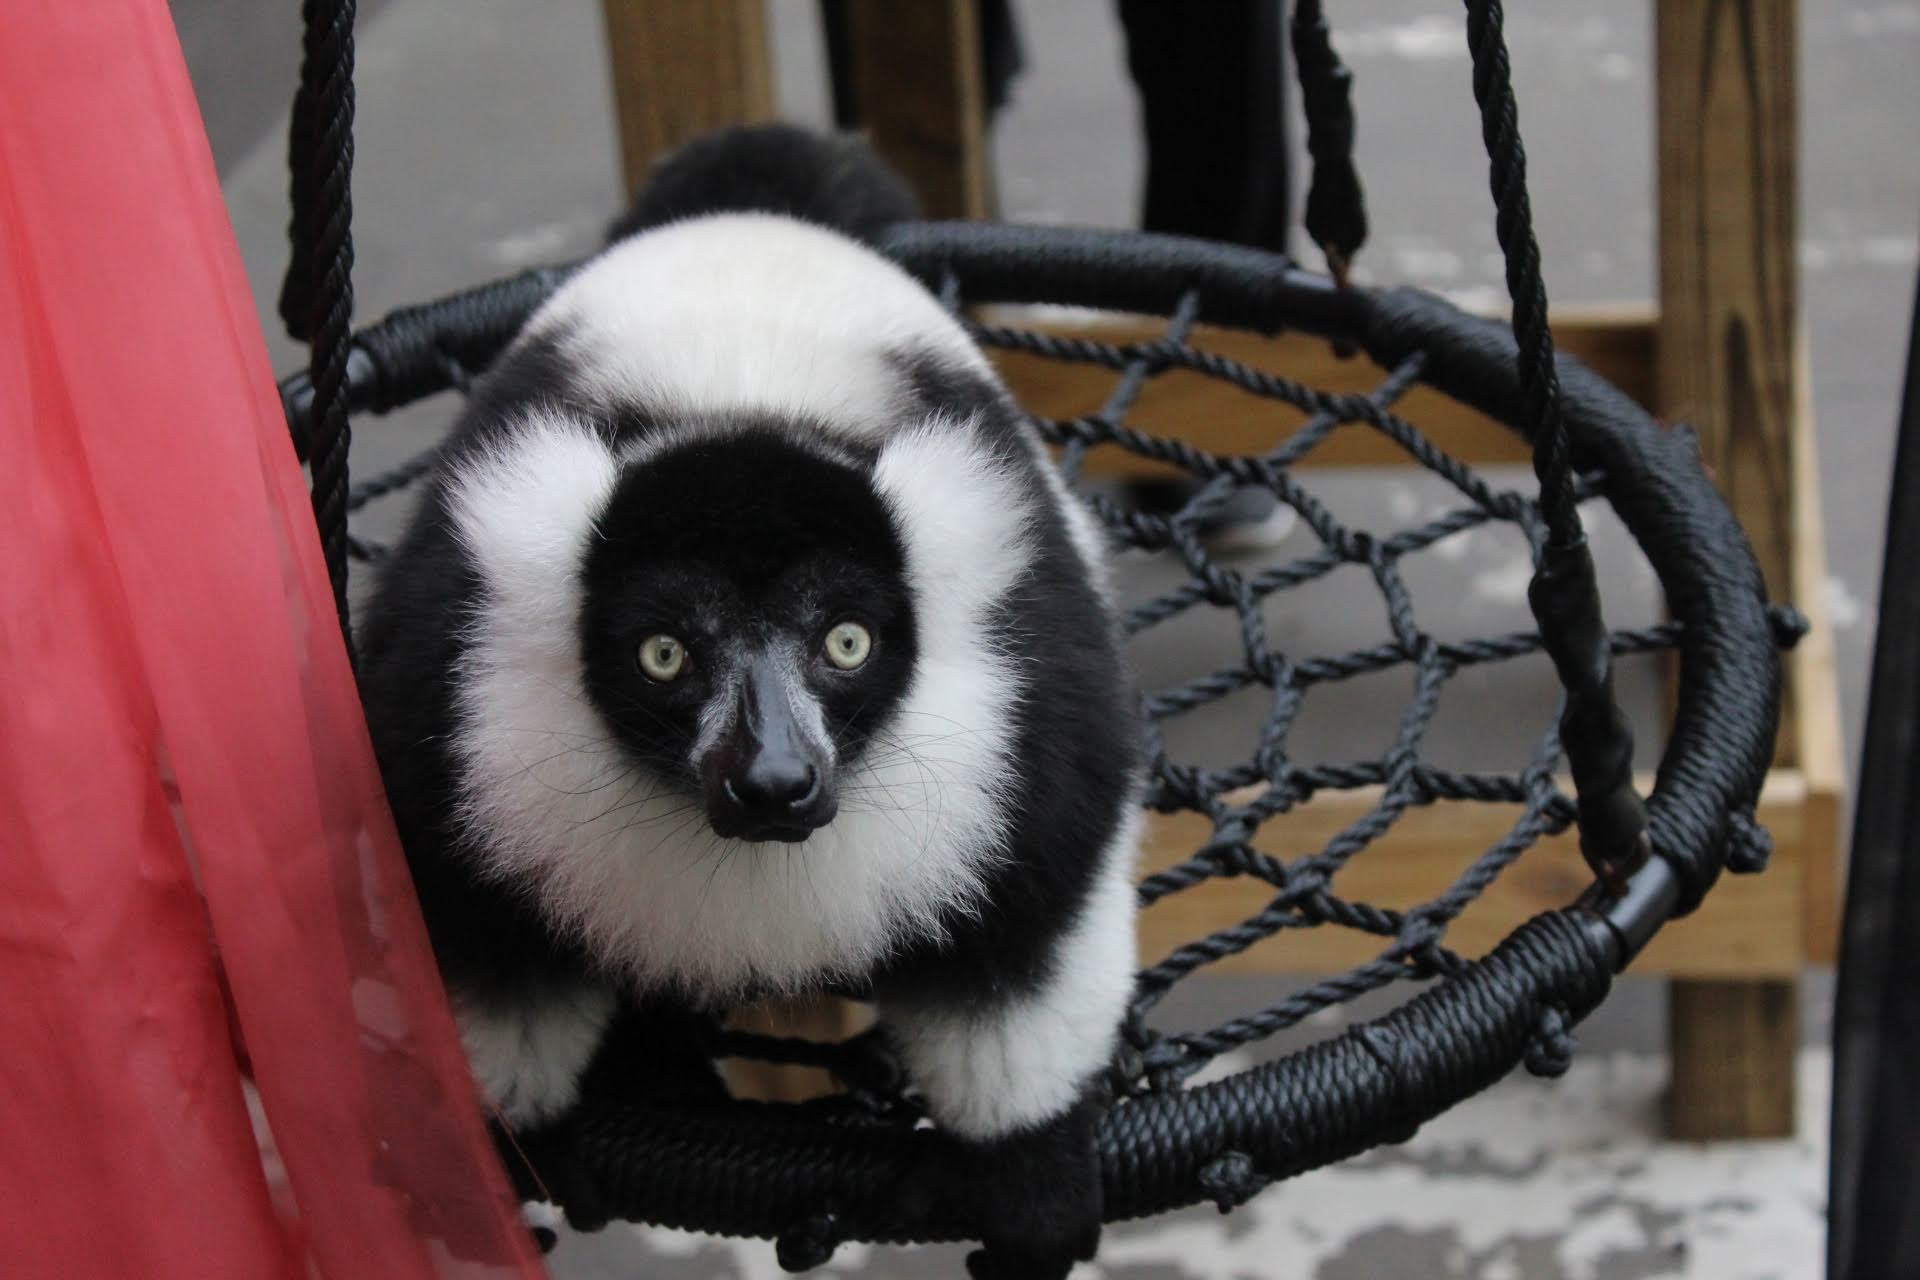 A black and white ruffed lemur sits on a rope swing next to a pink curtain.